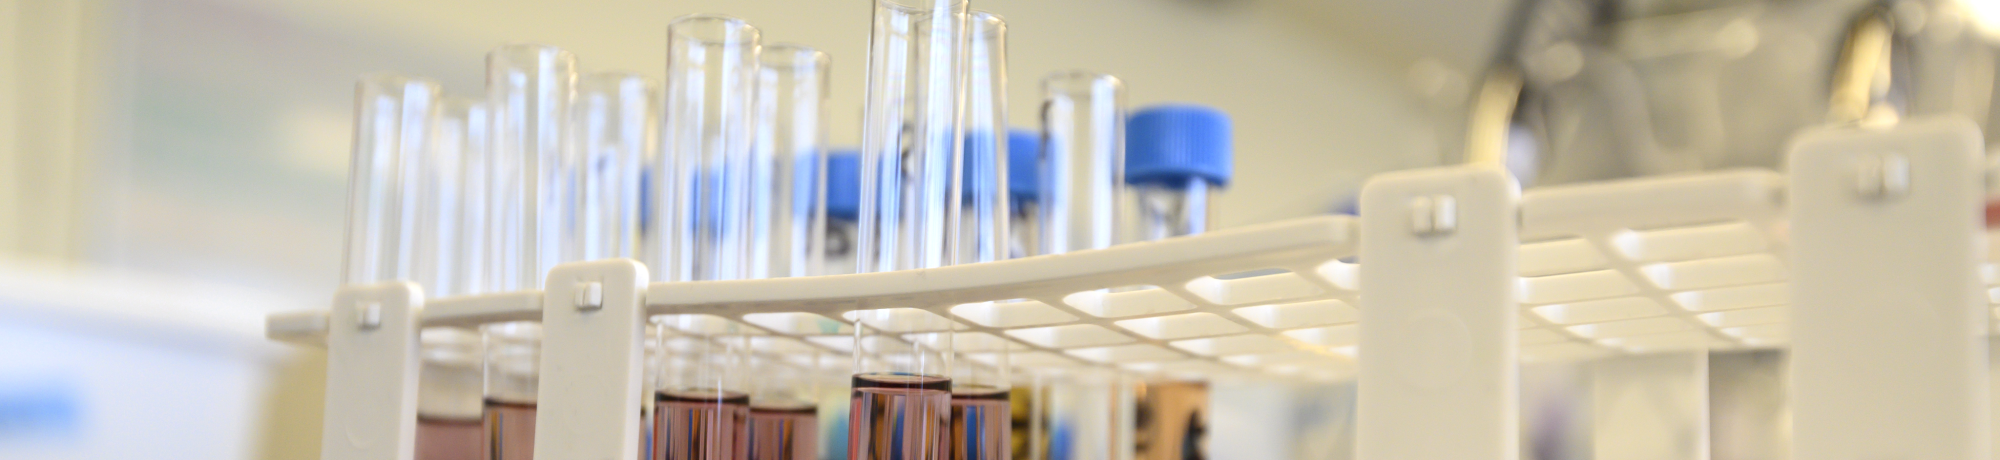 Test tubes in a lab